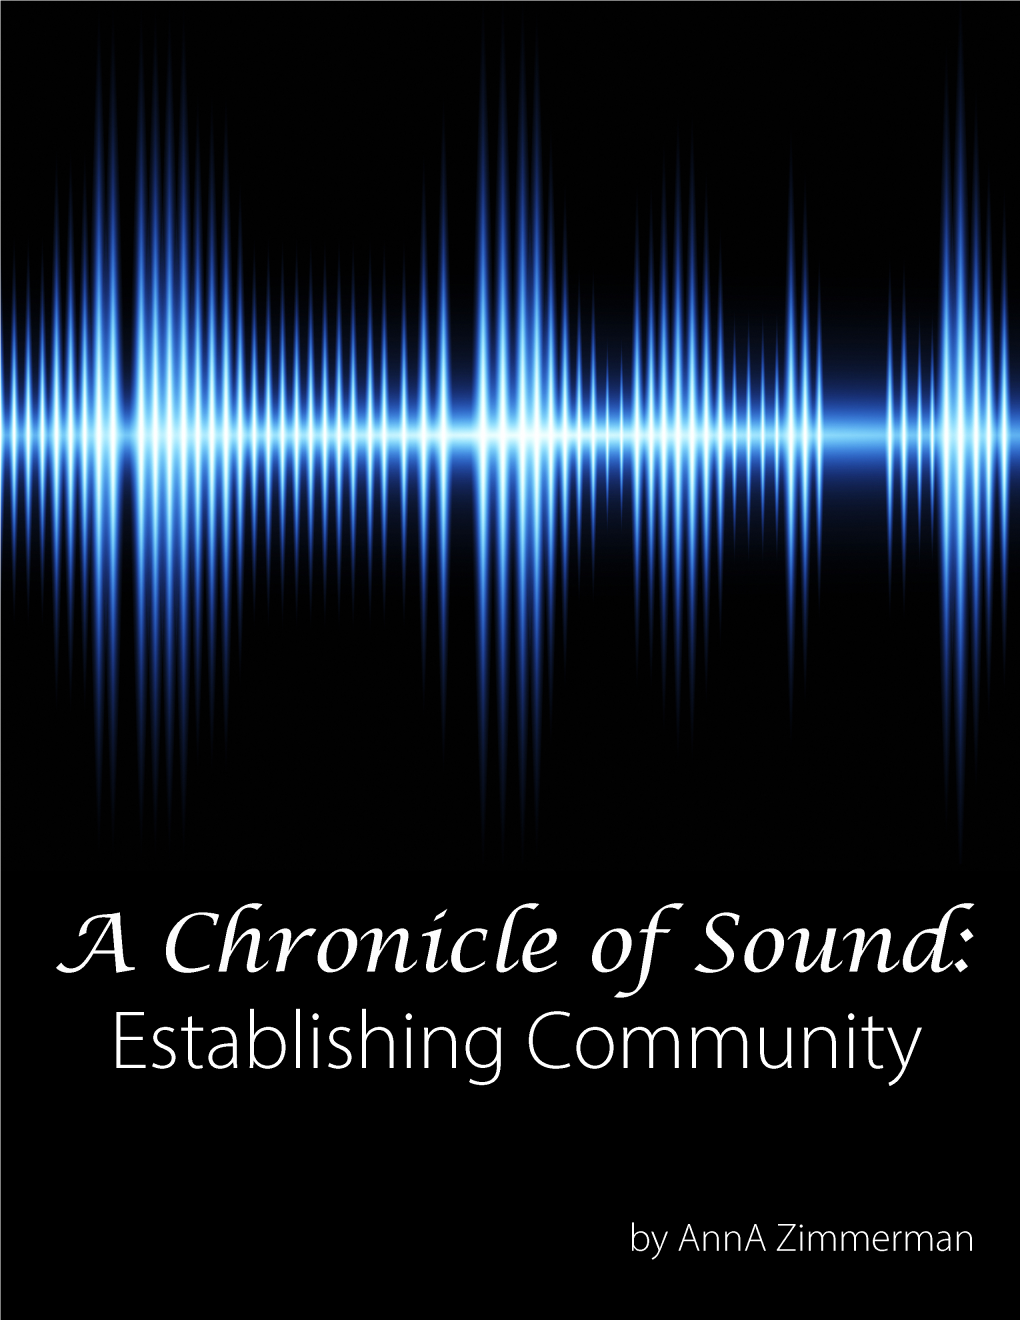 A Chronicle of Sound: Establishing Community | by Anna Zimmerman | Published by Sapphire Leadership Group, LLC Table of Contents